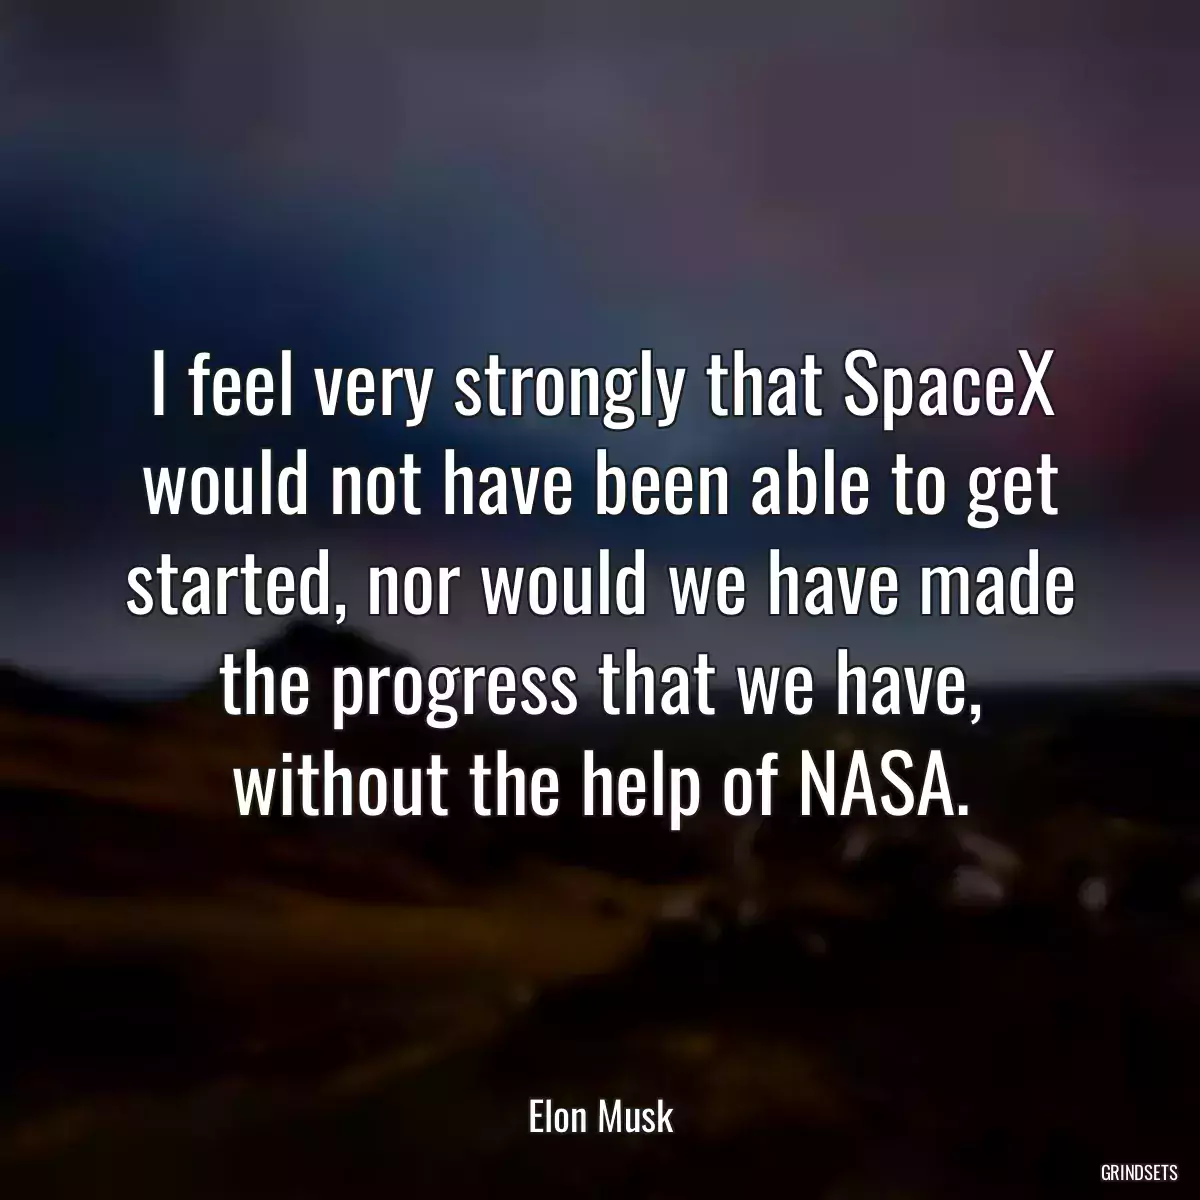 I feel very strongly that SpaceX would not have been able to get started, nor would we have made the progress that we have, without the help of NASA.